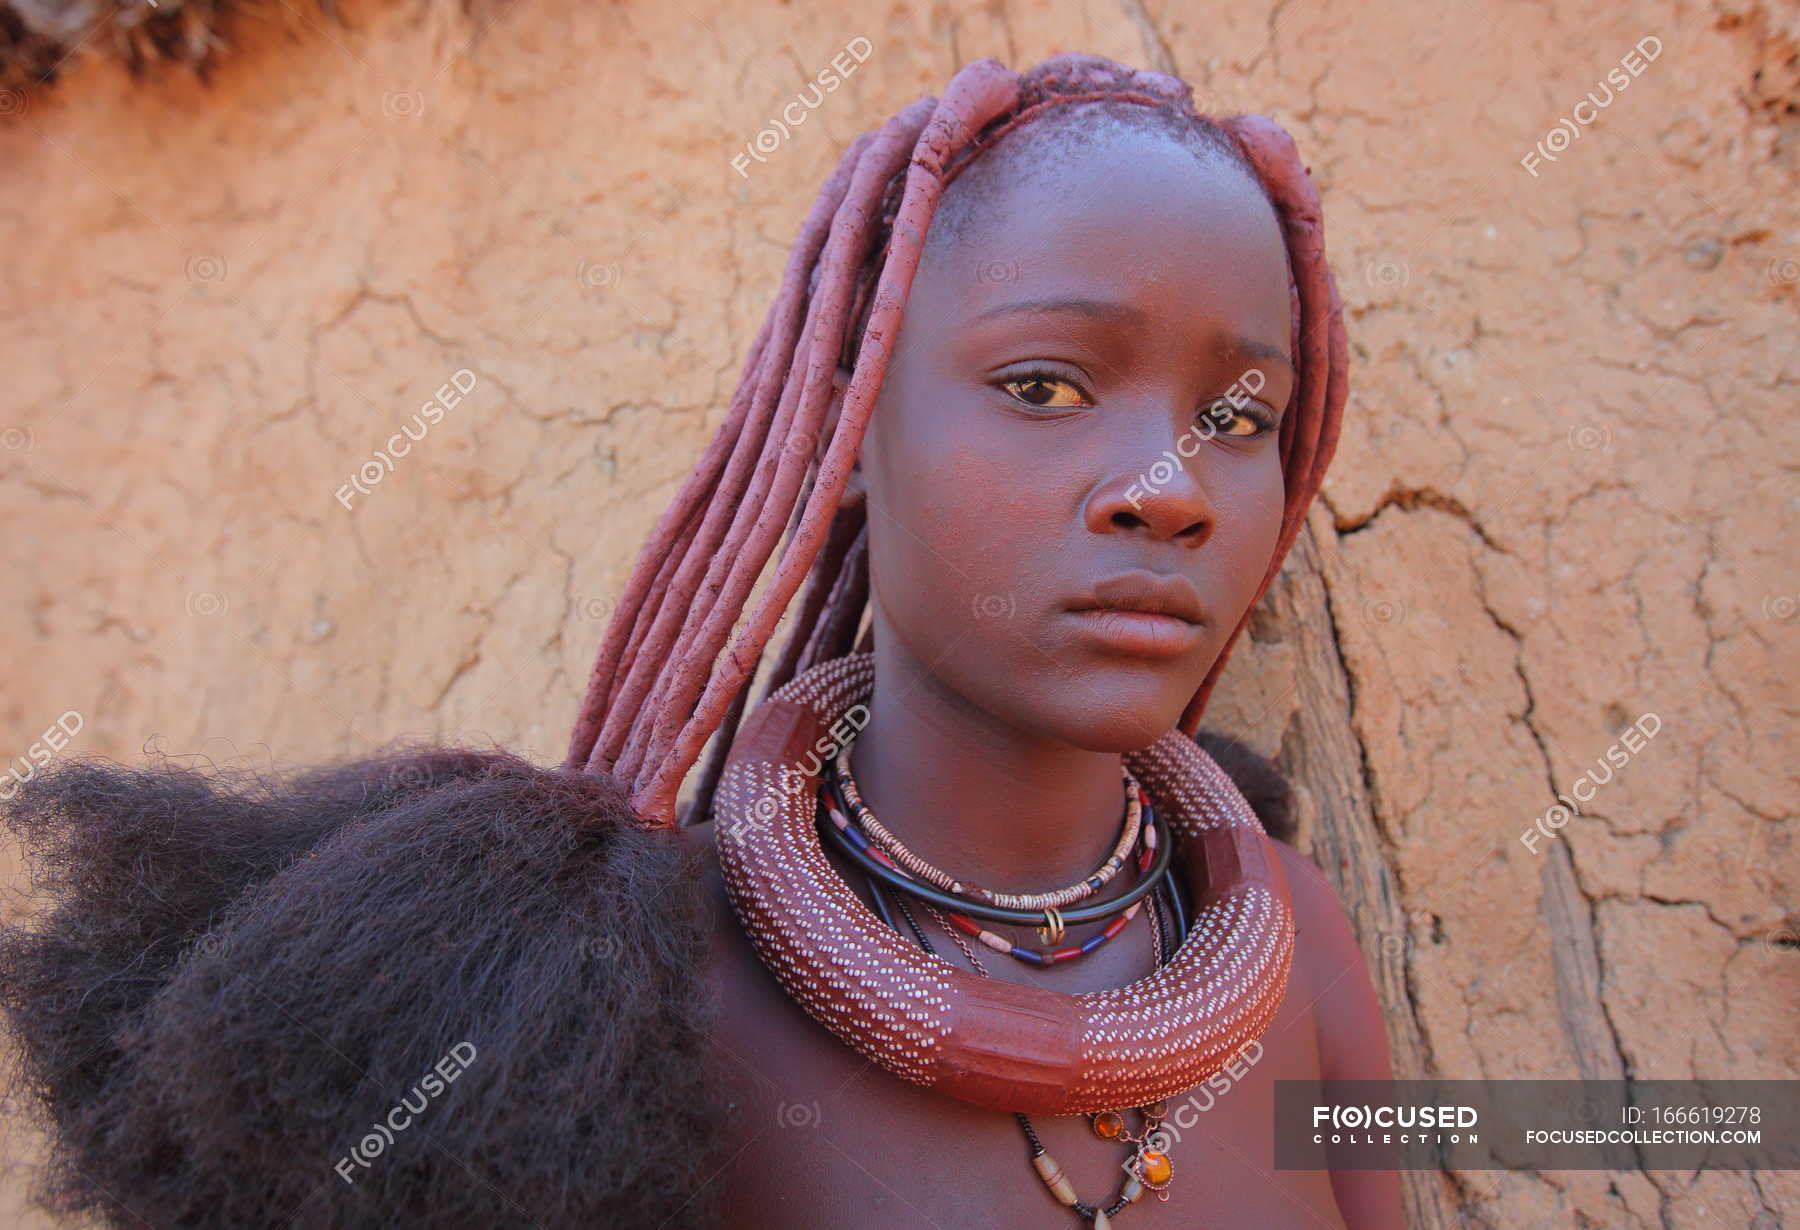 Focused 166619278 Stock Photo Local Woman In Village Of 